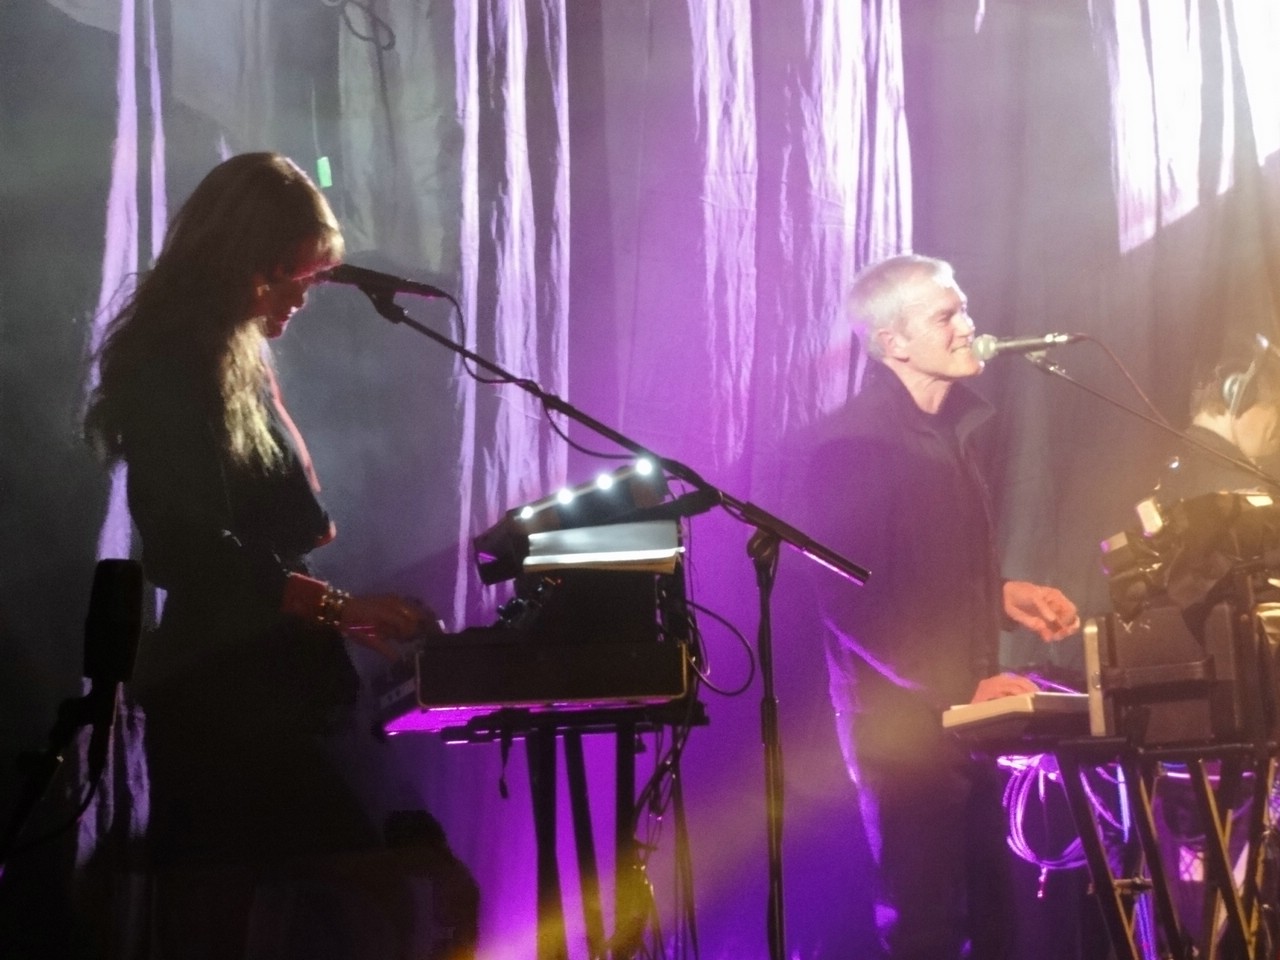 50 John Foxx and The Maths live at Roundhouse 2013.jpg